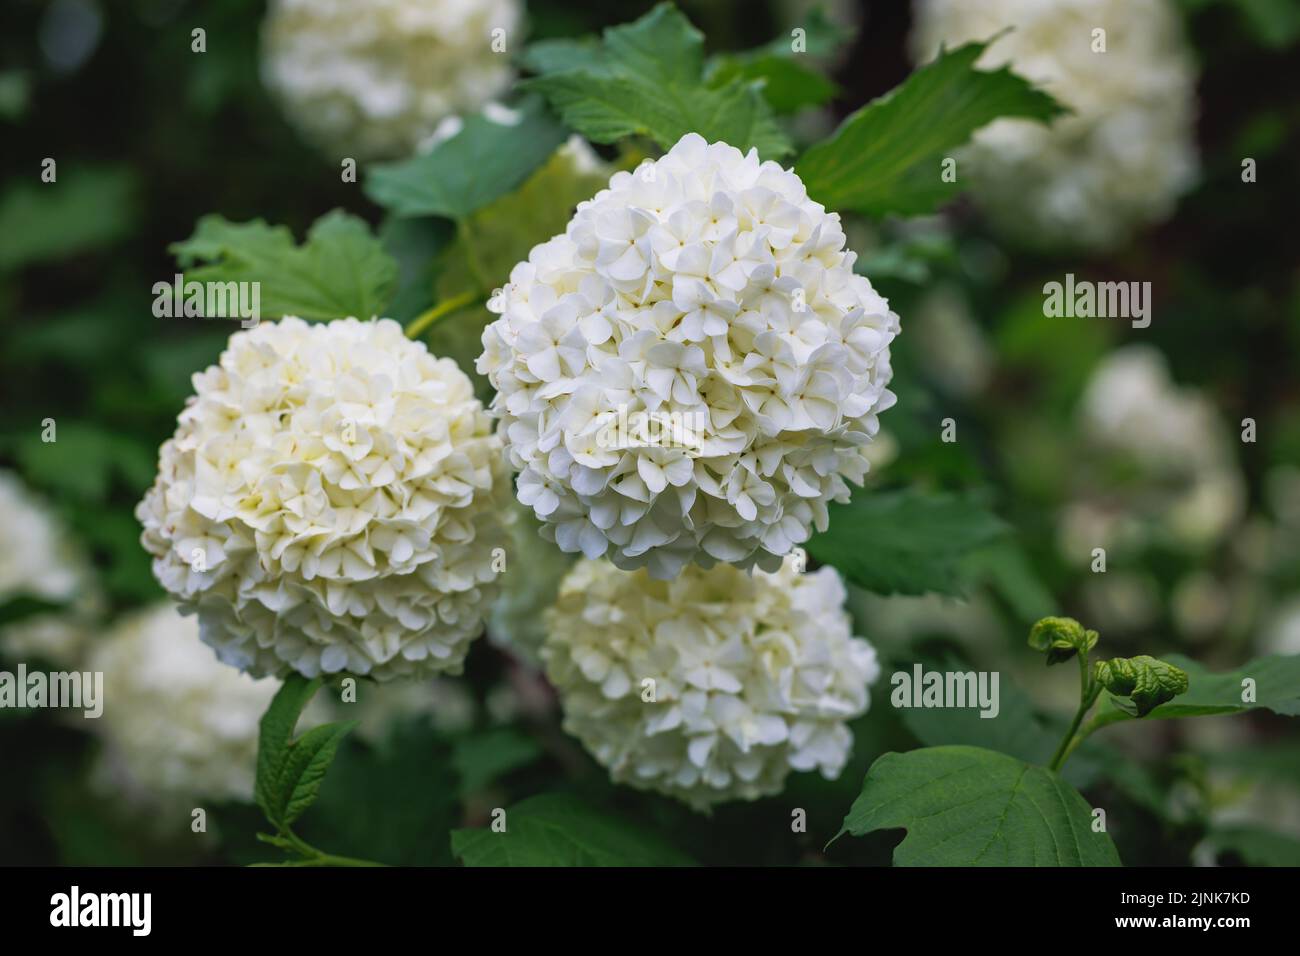 Rounded white flowers of Viburnum plant in the garden Stock Photo